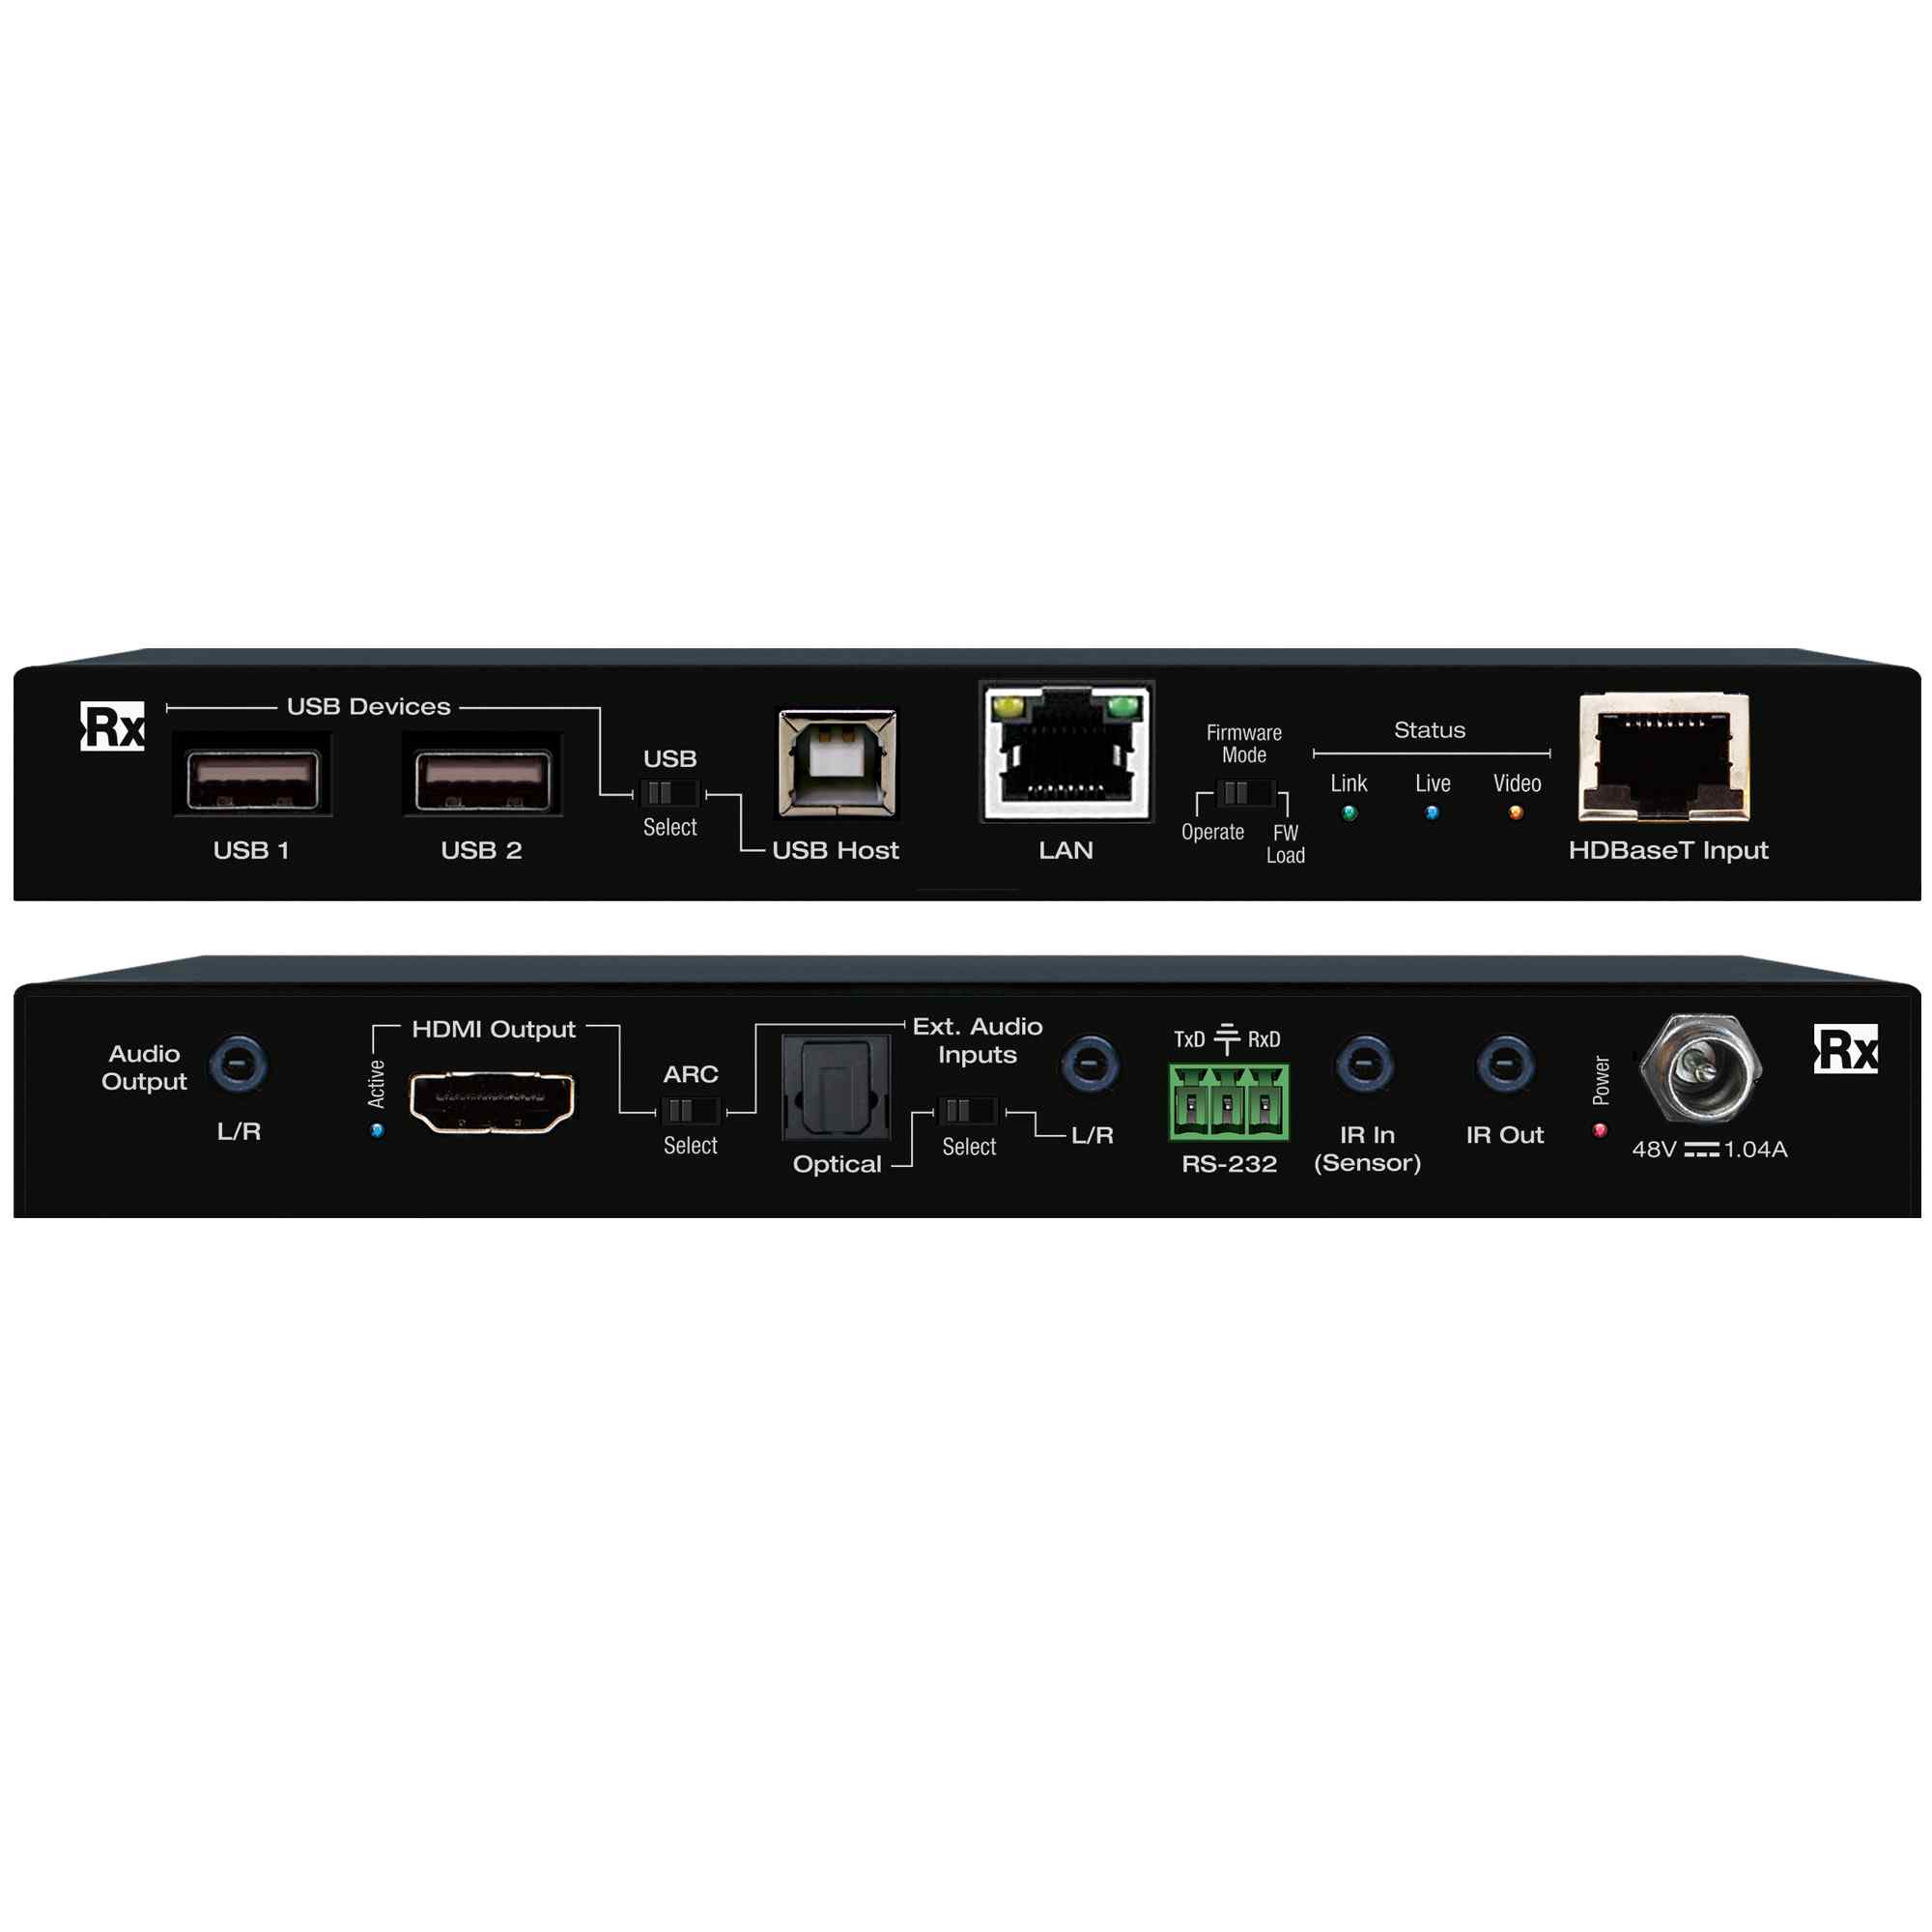 Thumbnail of  hdbaset switcher Rx front and rear